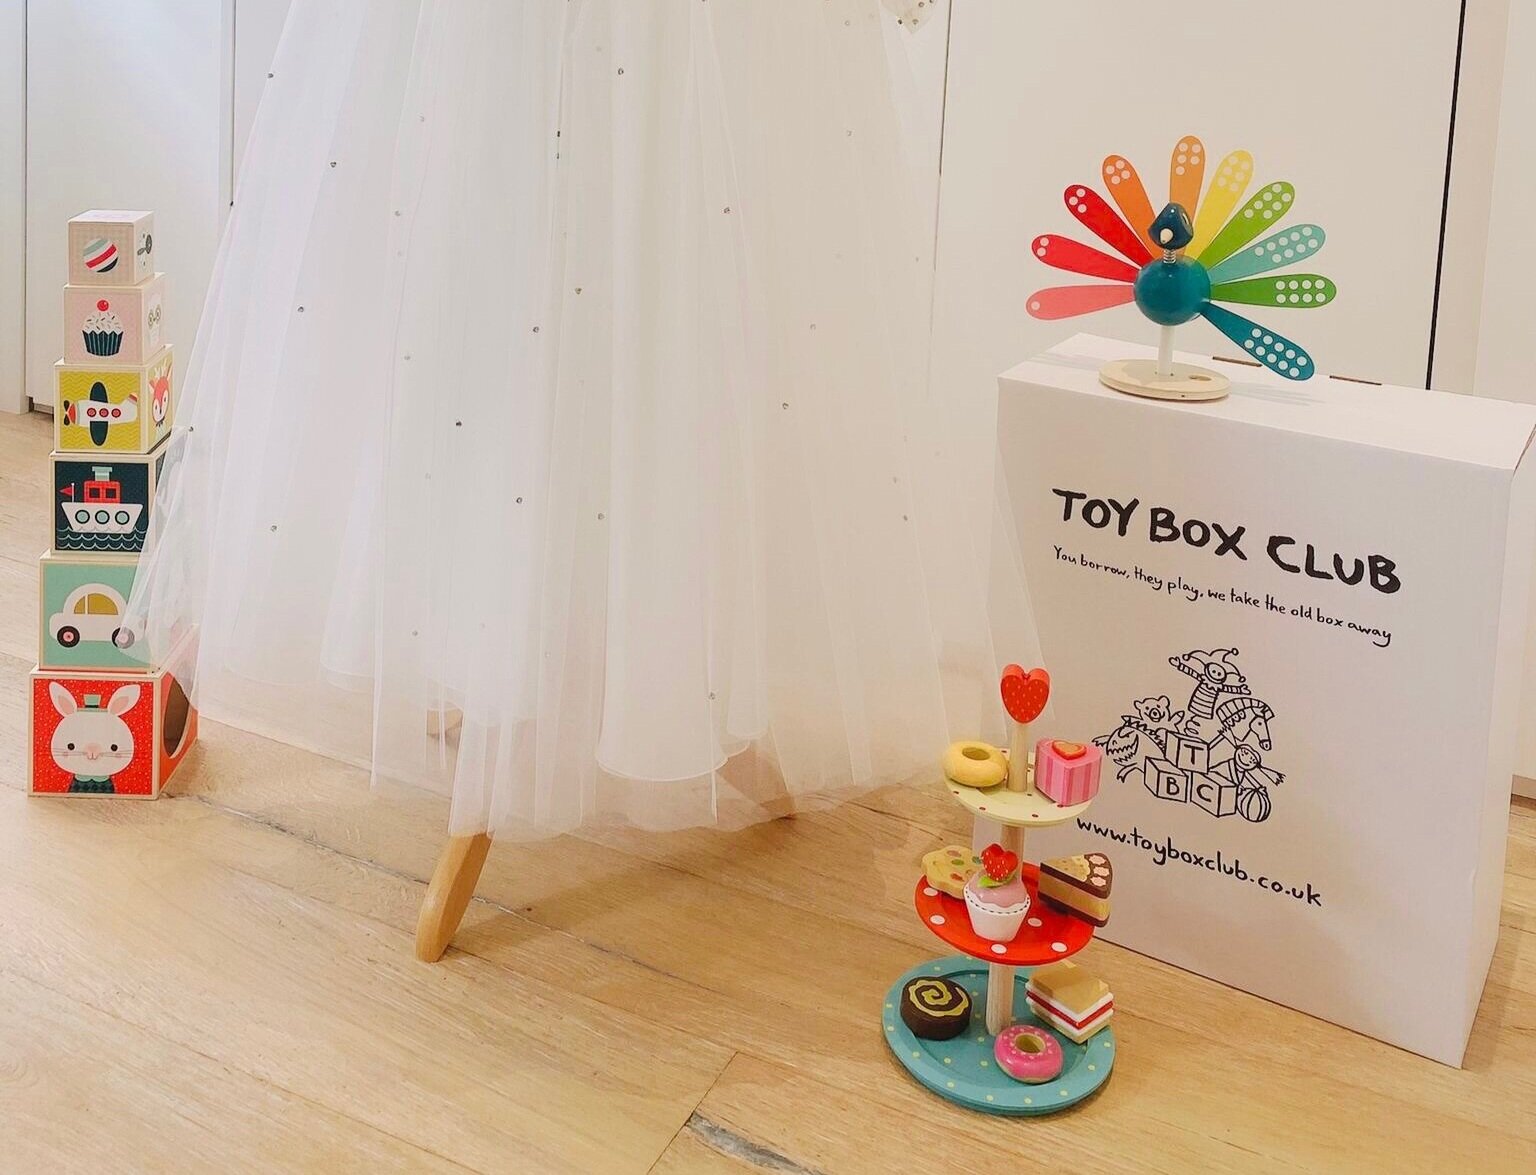 Wedding event and party boxes for Kids, keep kids busy, entertain kids, Toy Box Club